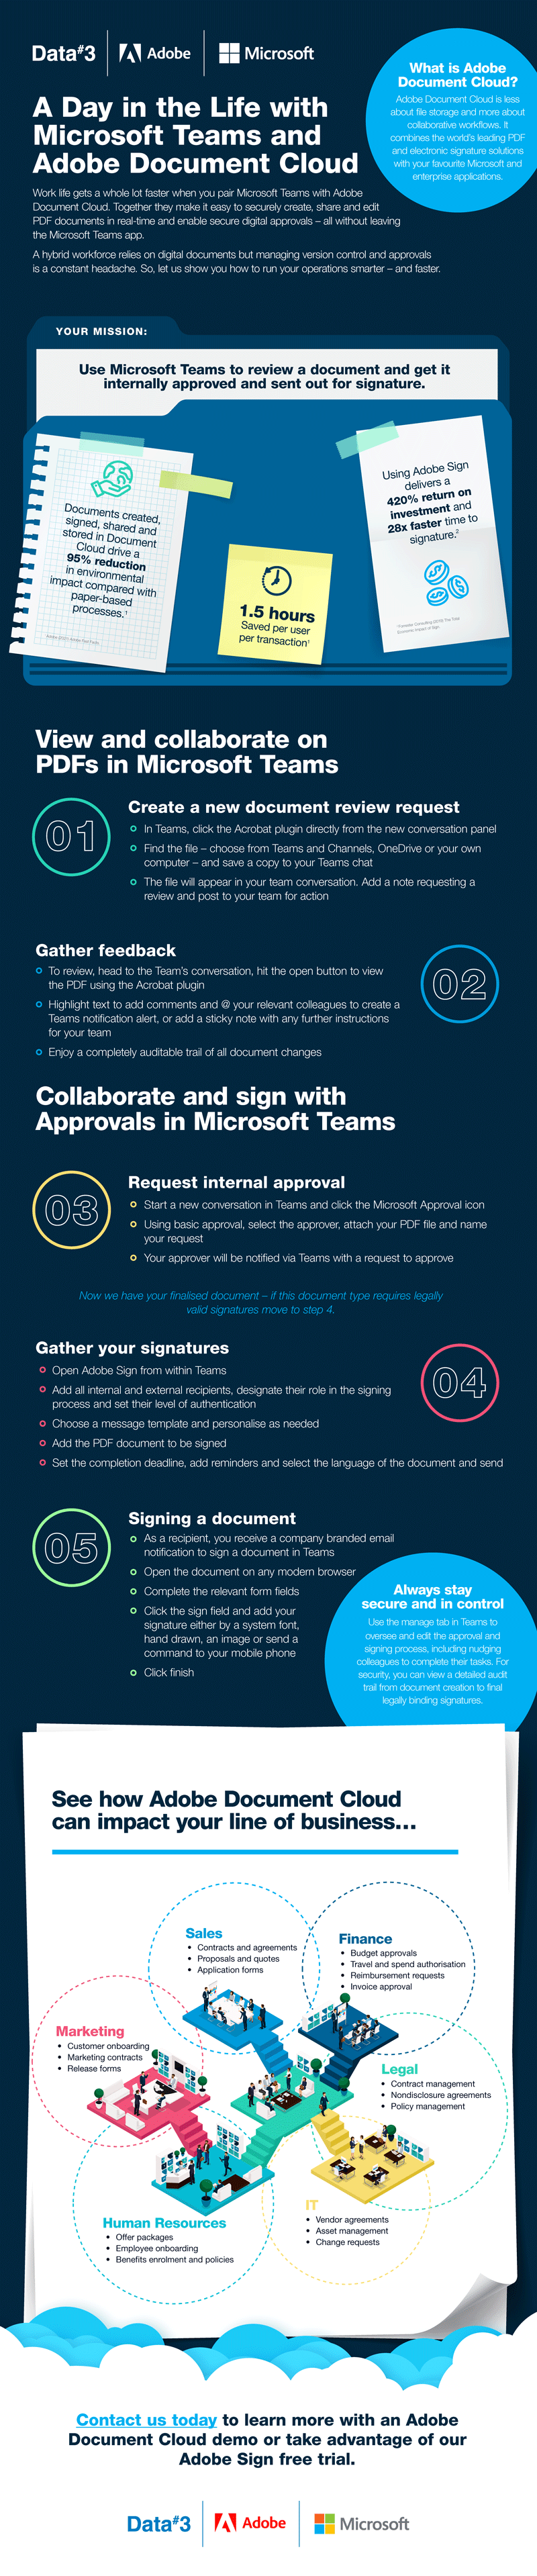 A day in the Life of MS Teams and Adobe DC Infographic